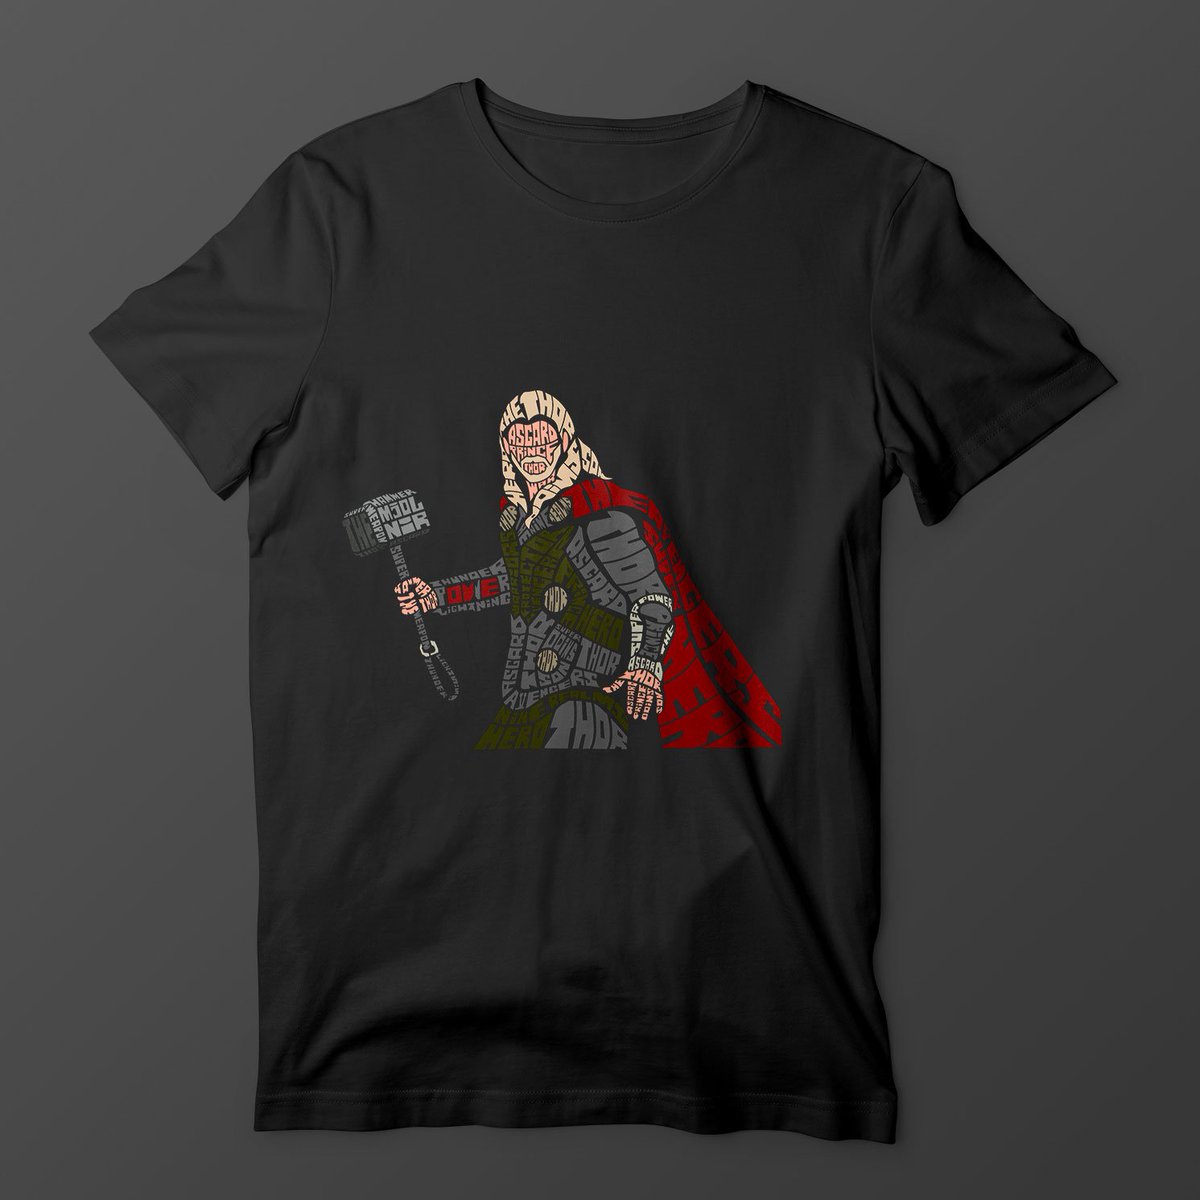 We deem you worthy of this Thorsome tee! 
Sign up for 15% off your first order at https://t.co/YGeCdz0WBe https://t.co/4XvYAoNmqz